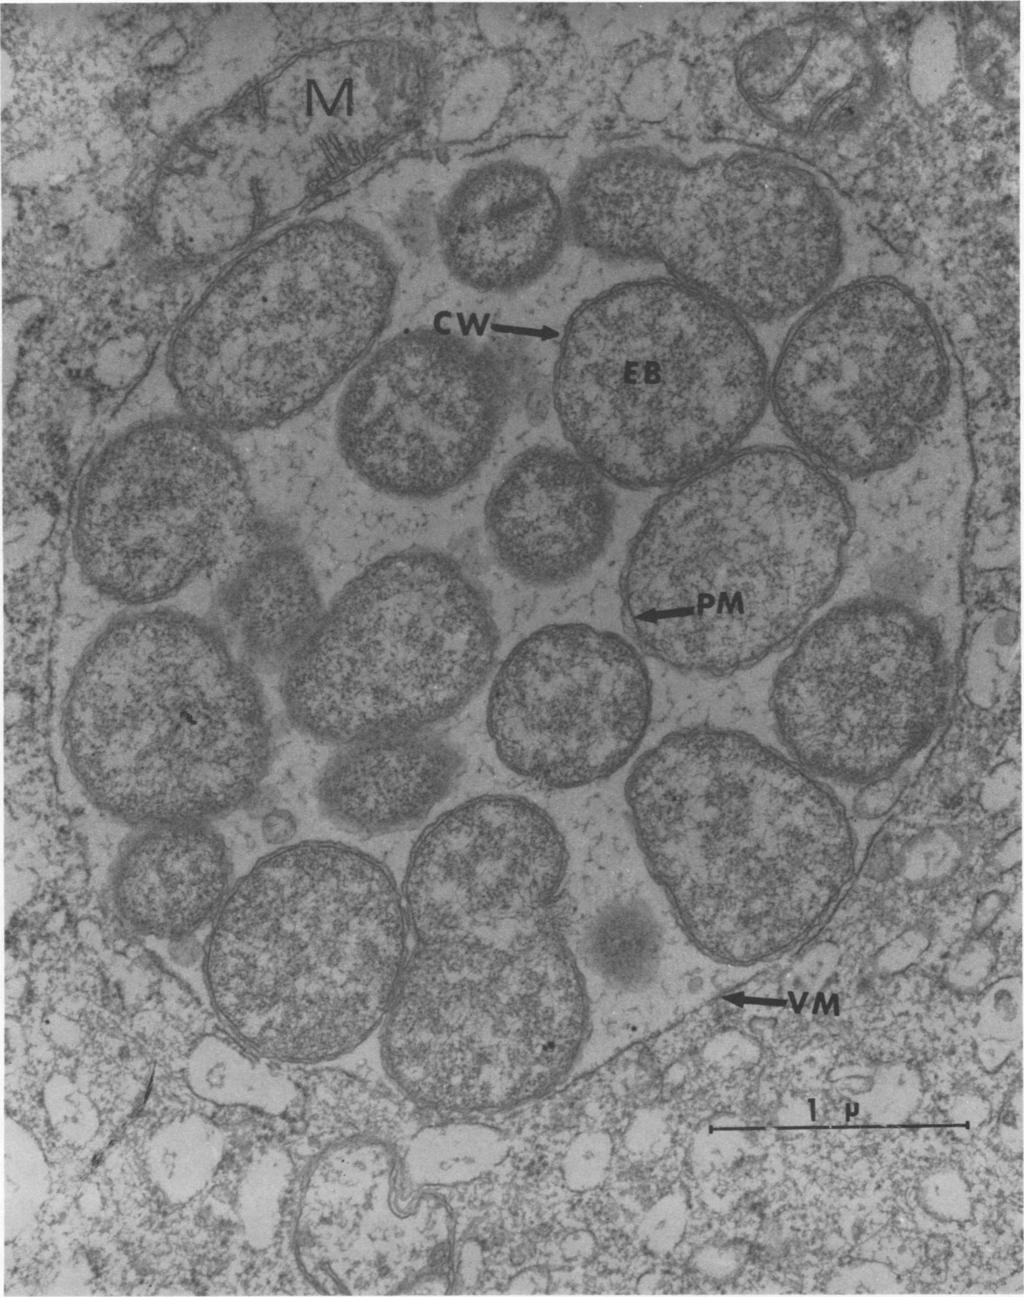 VOL. 7, 1973 ULTRASTRUCTURE OF E. CANIS 269 -v W~~~~~~~~~~~~~~ 4 N~~~~~~~~. FIG. 5. Inclusion of E. canis in a cultured monocyte.